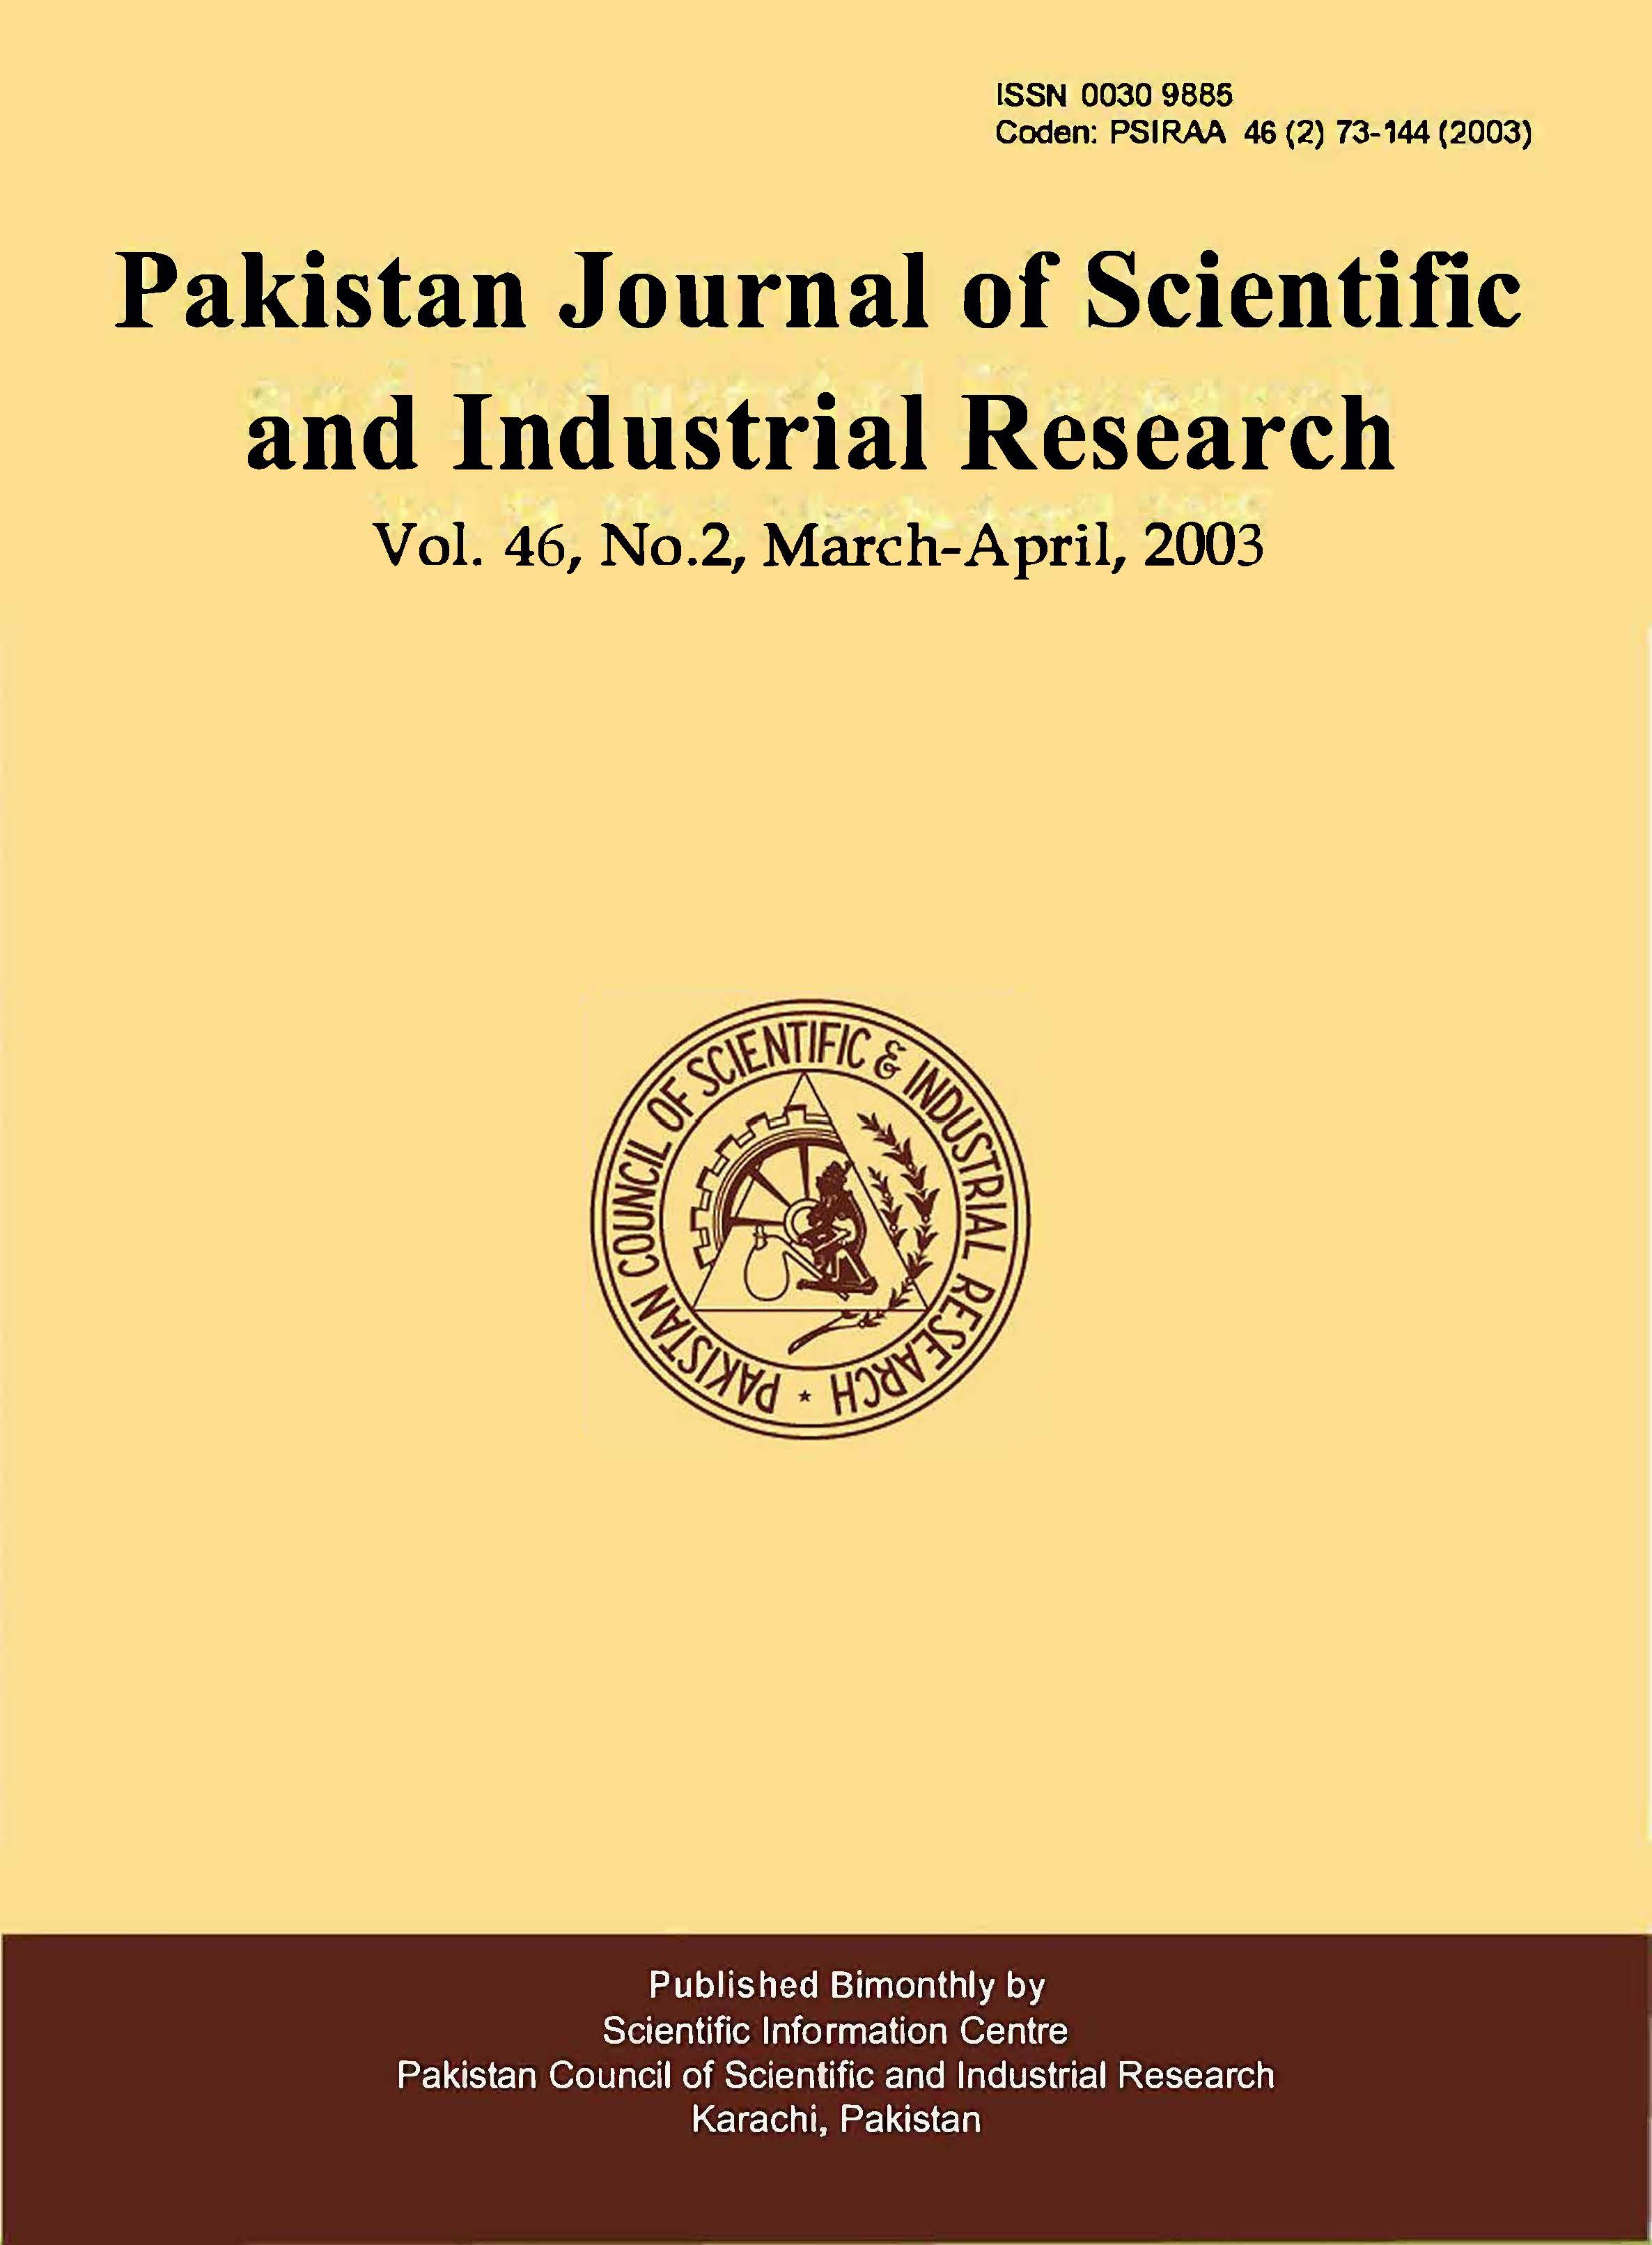 					View Vol. 46 No. 2 (2003): Pakistan Journal of Scientific and Industrial Research
				